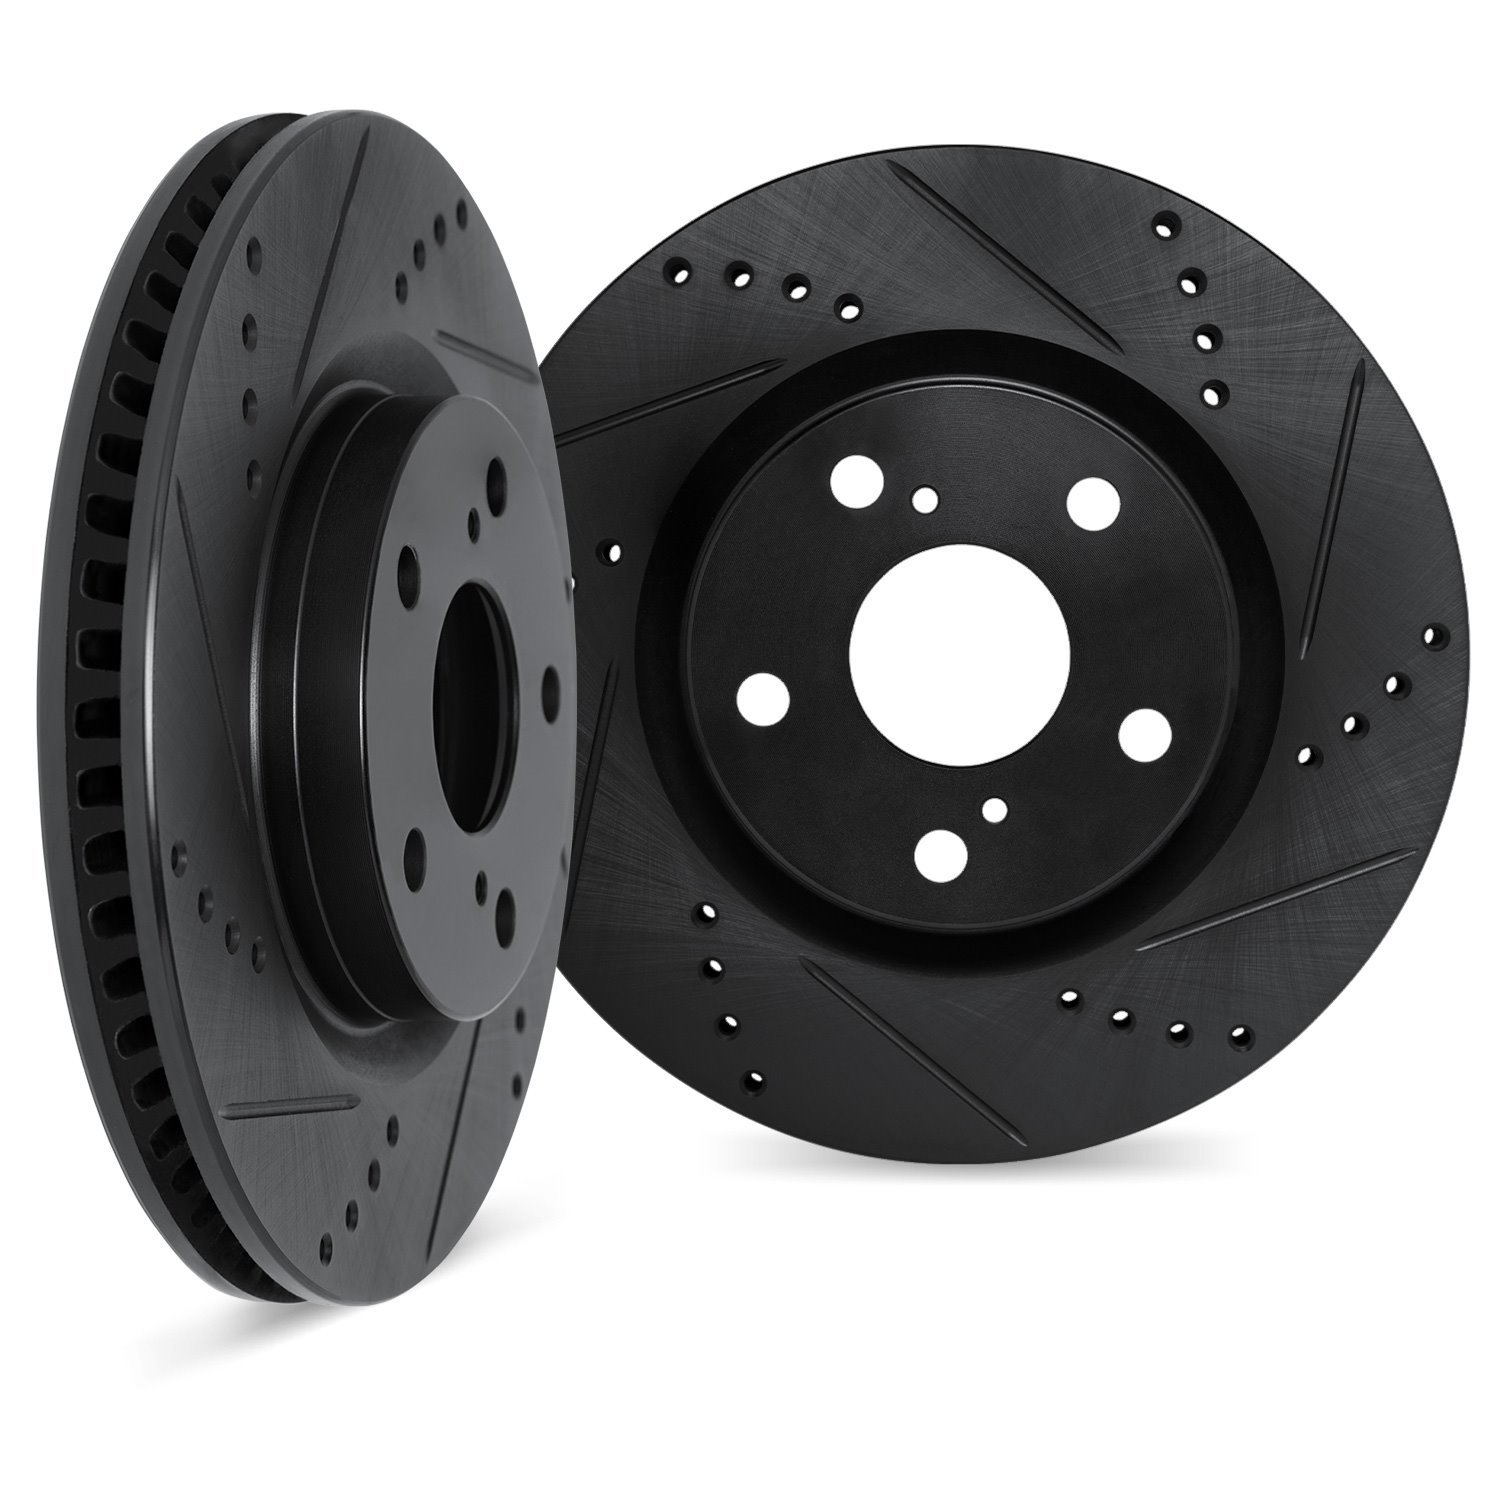 8002-75029 Drilled/Slotted Brake Rotors [Black], Fits Select Lexus/Toyota/Scion, Position: Rear